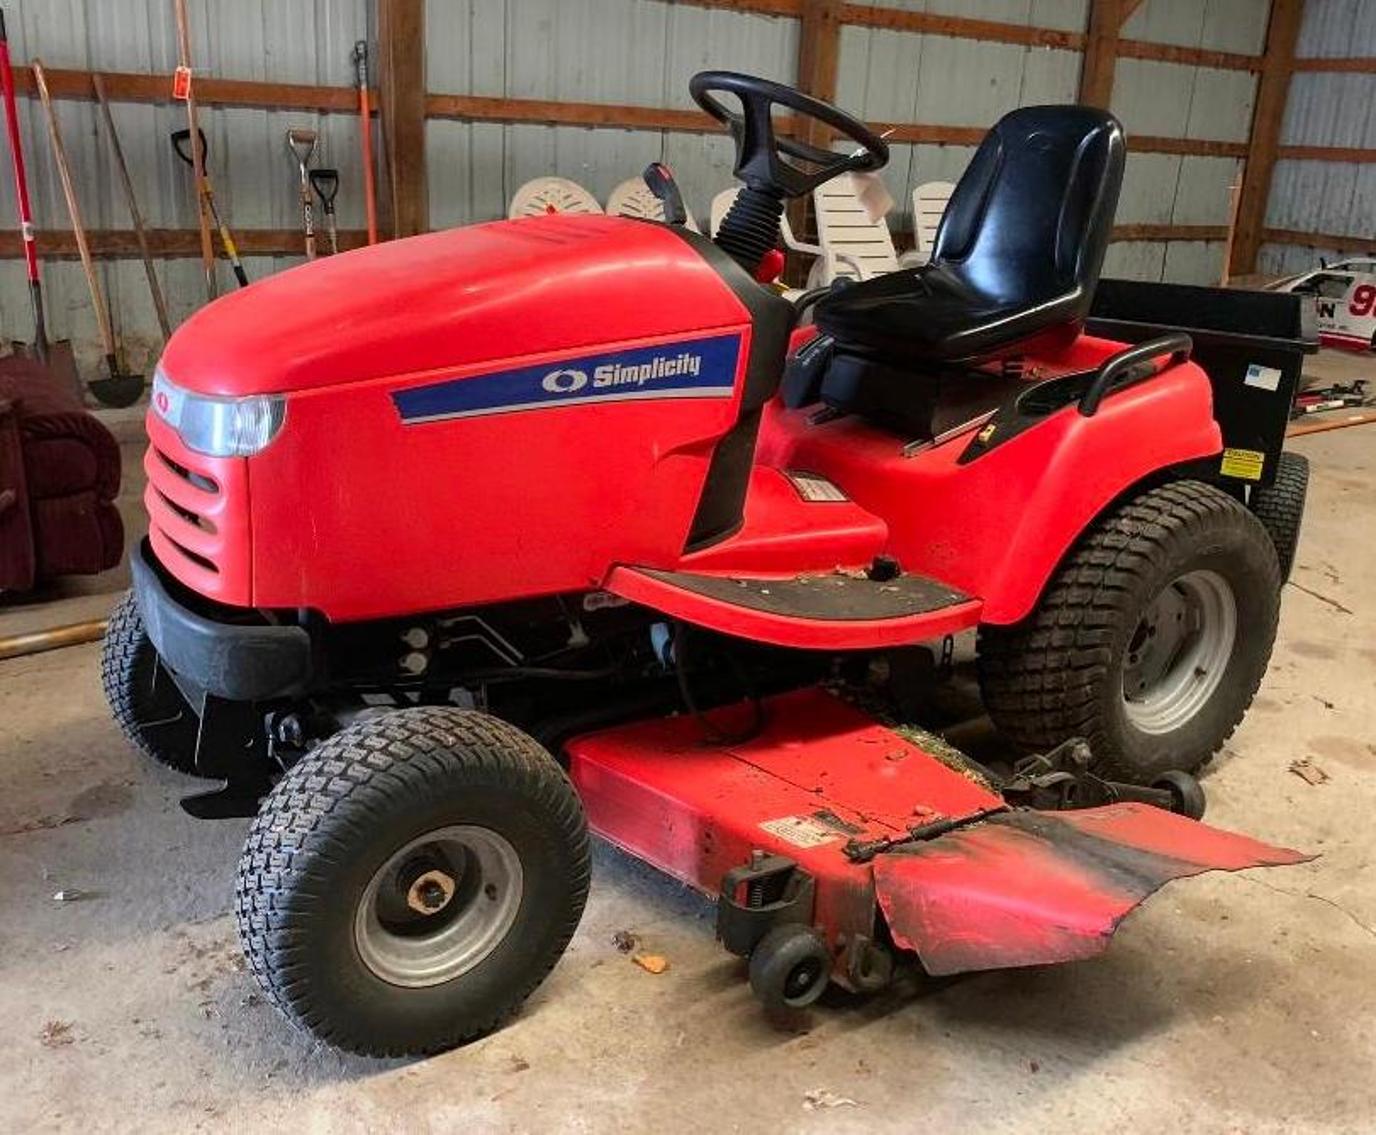 Estate Sale: Lawn Mowers, Woodworking and Shop Tools